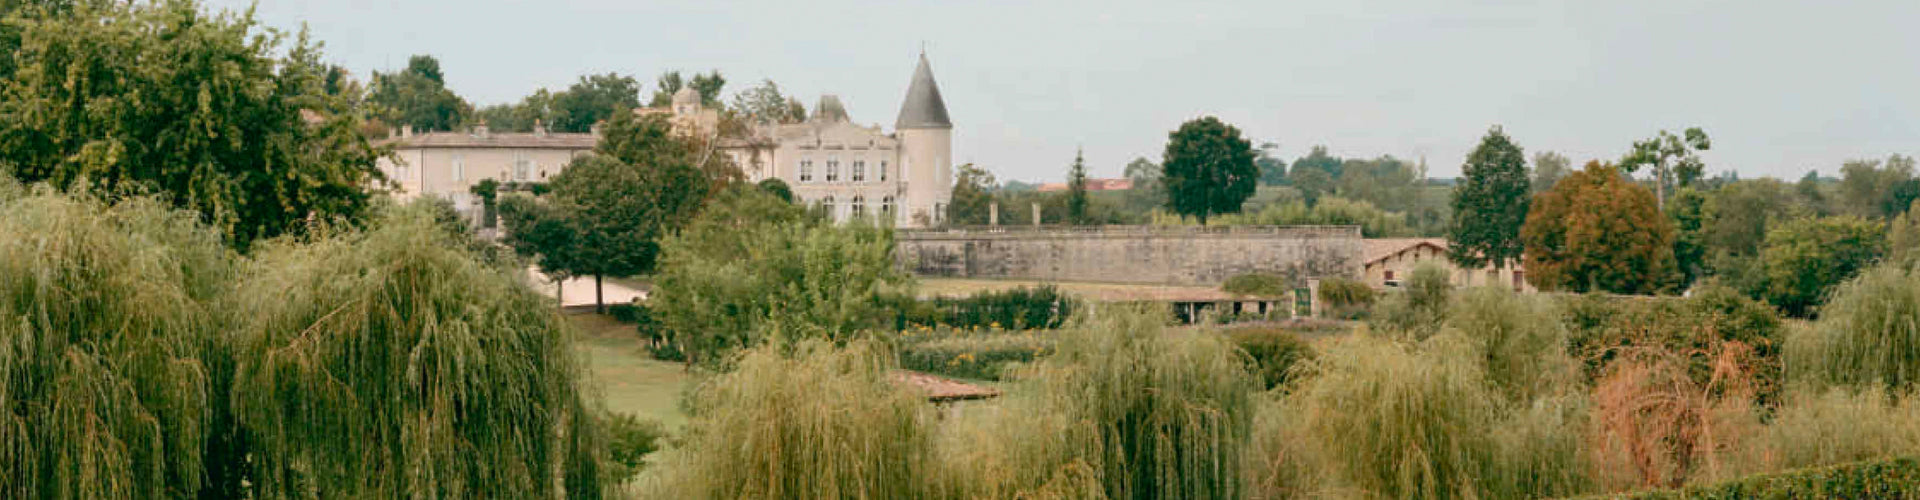 Panorama of Château Lafite-Rothschild Property & Gardens in Pauillac, Bordeaux